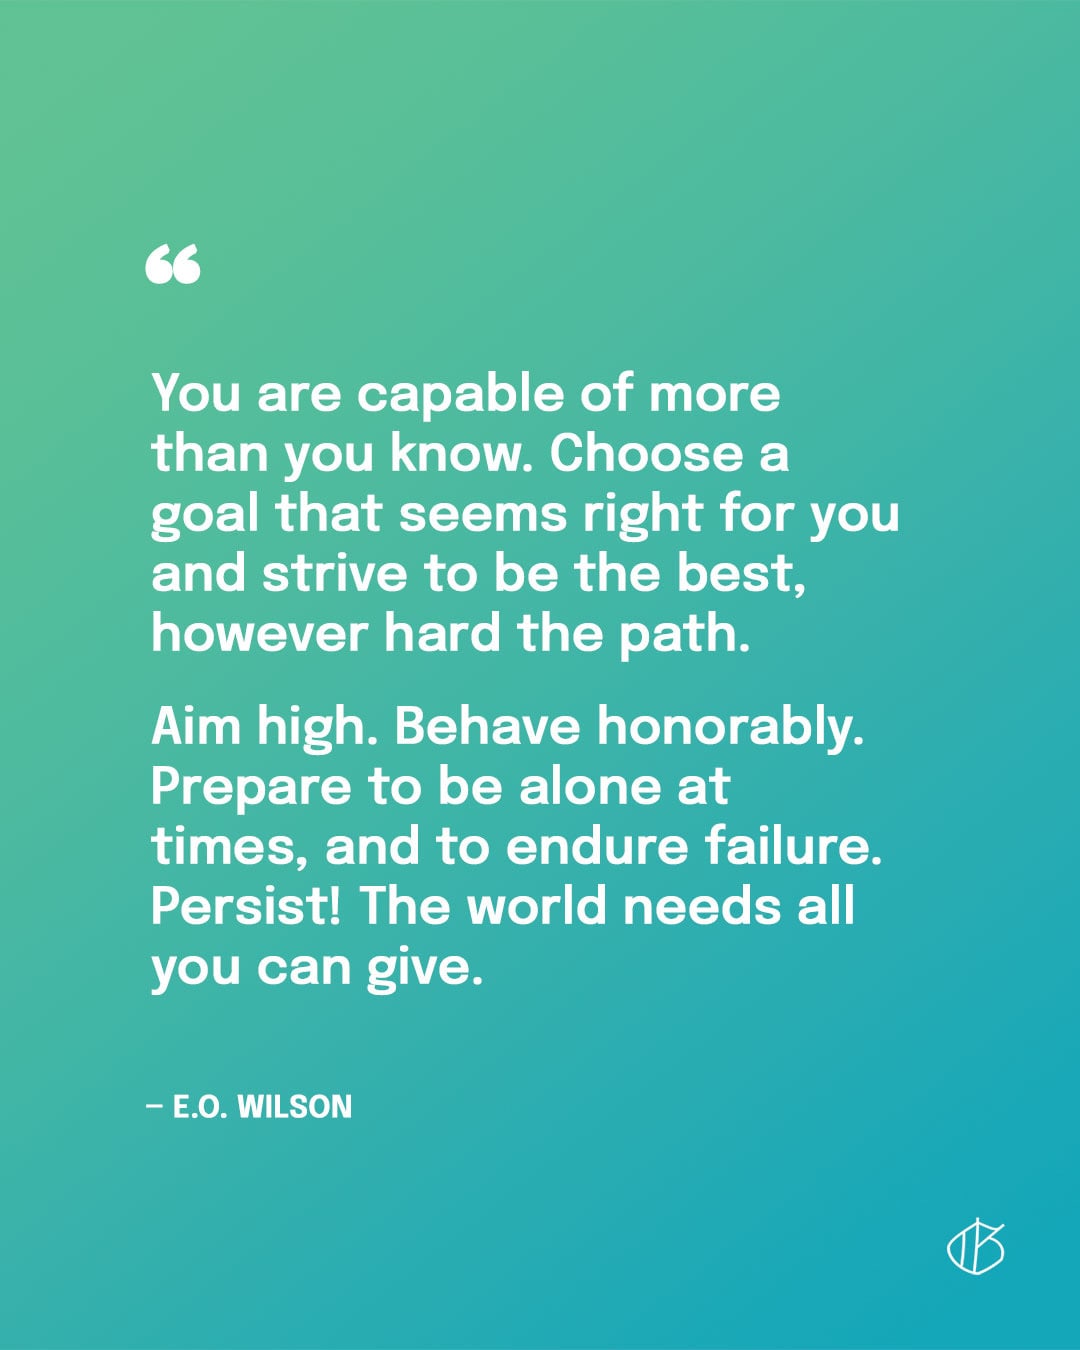 “You are capable of more than you know. Choose a goal that seems right for you and strive to be the best, however hard the path. Aim high. Behave honorably. Prepare to be alone at times, and to endure failure. Persist! The world needs all you can give.” — E.O. Wilson quote